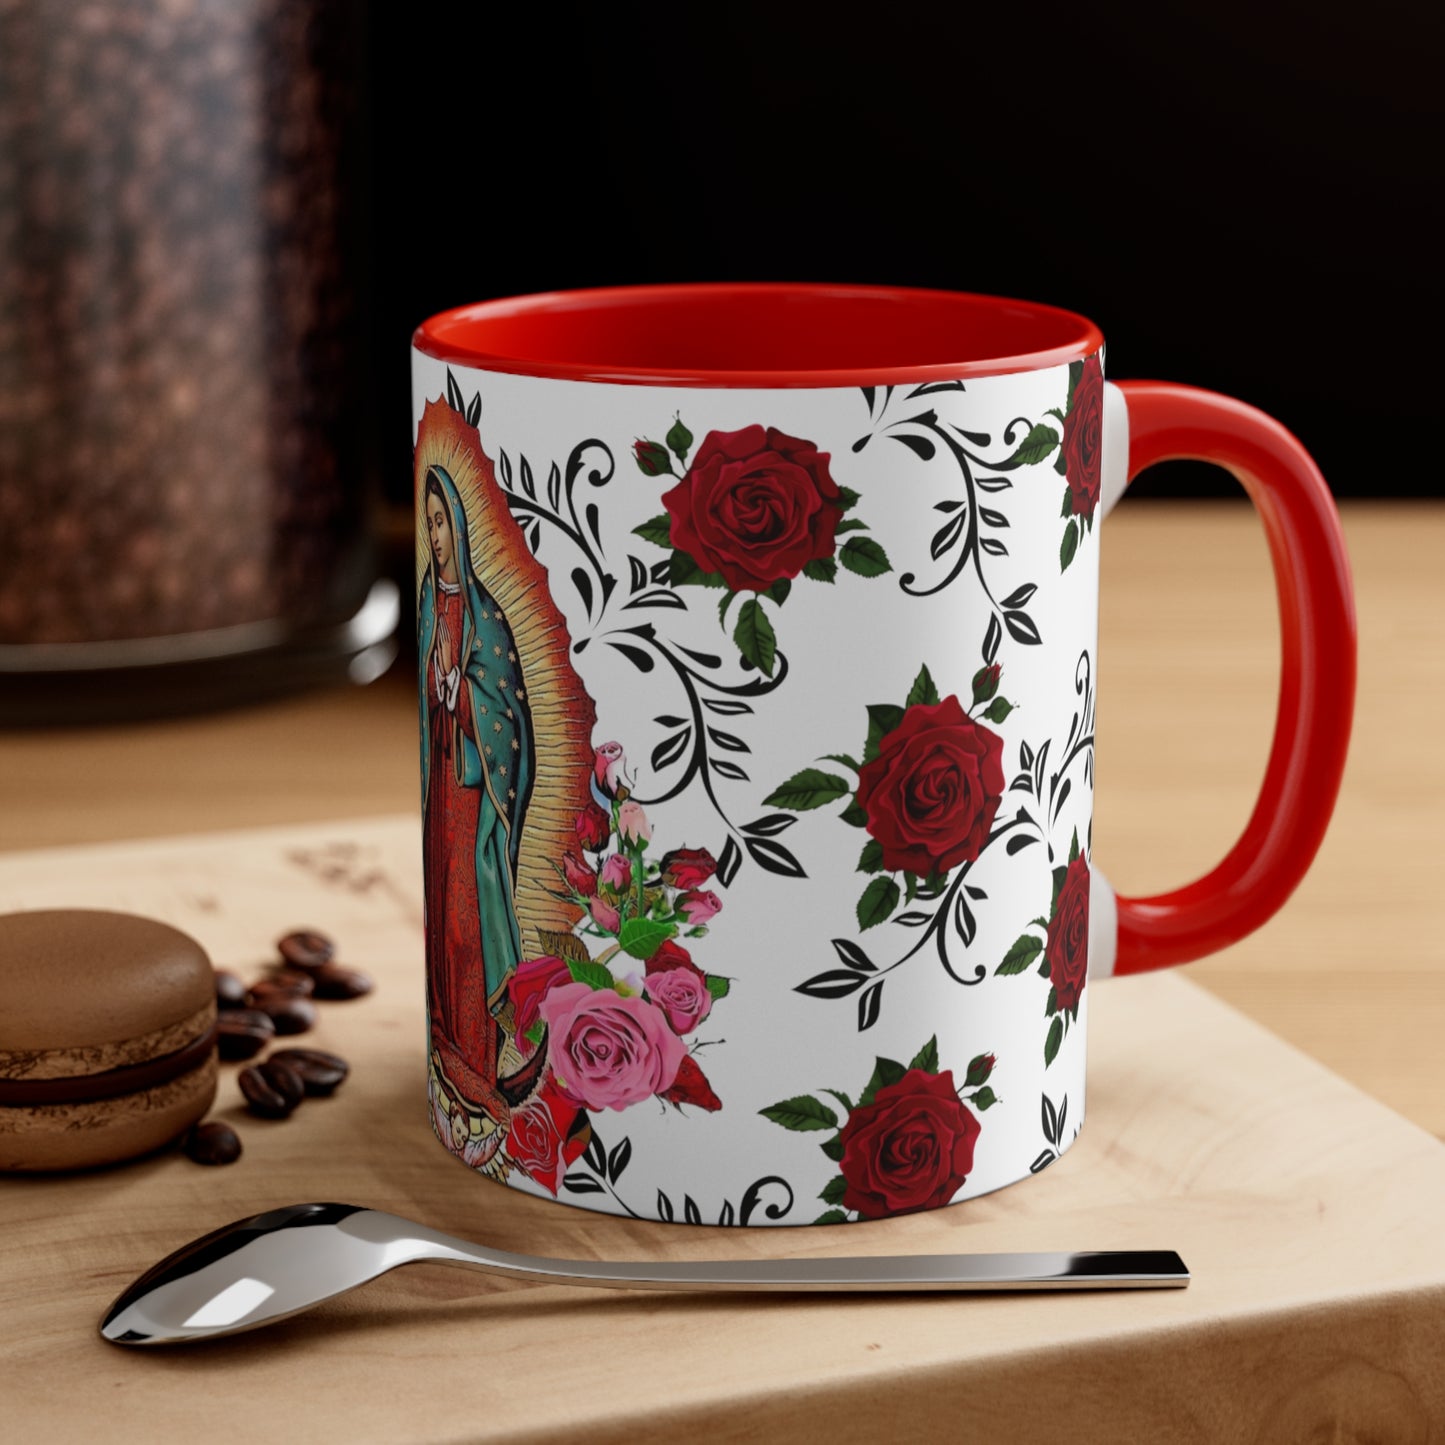 Virgen de Guadalupe Coffee Mug, 11oz. Lady guadalupe with roses and leaves.